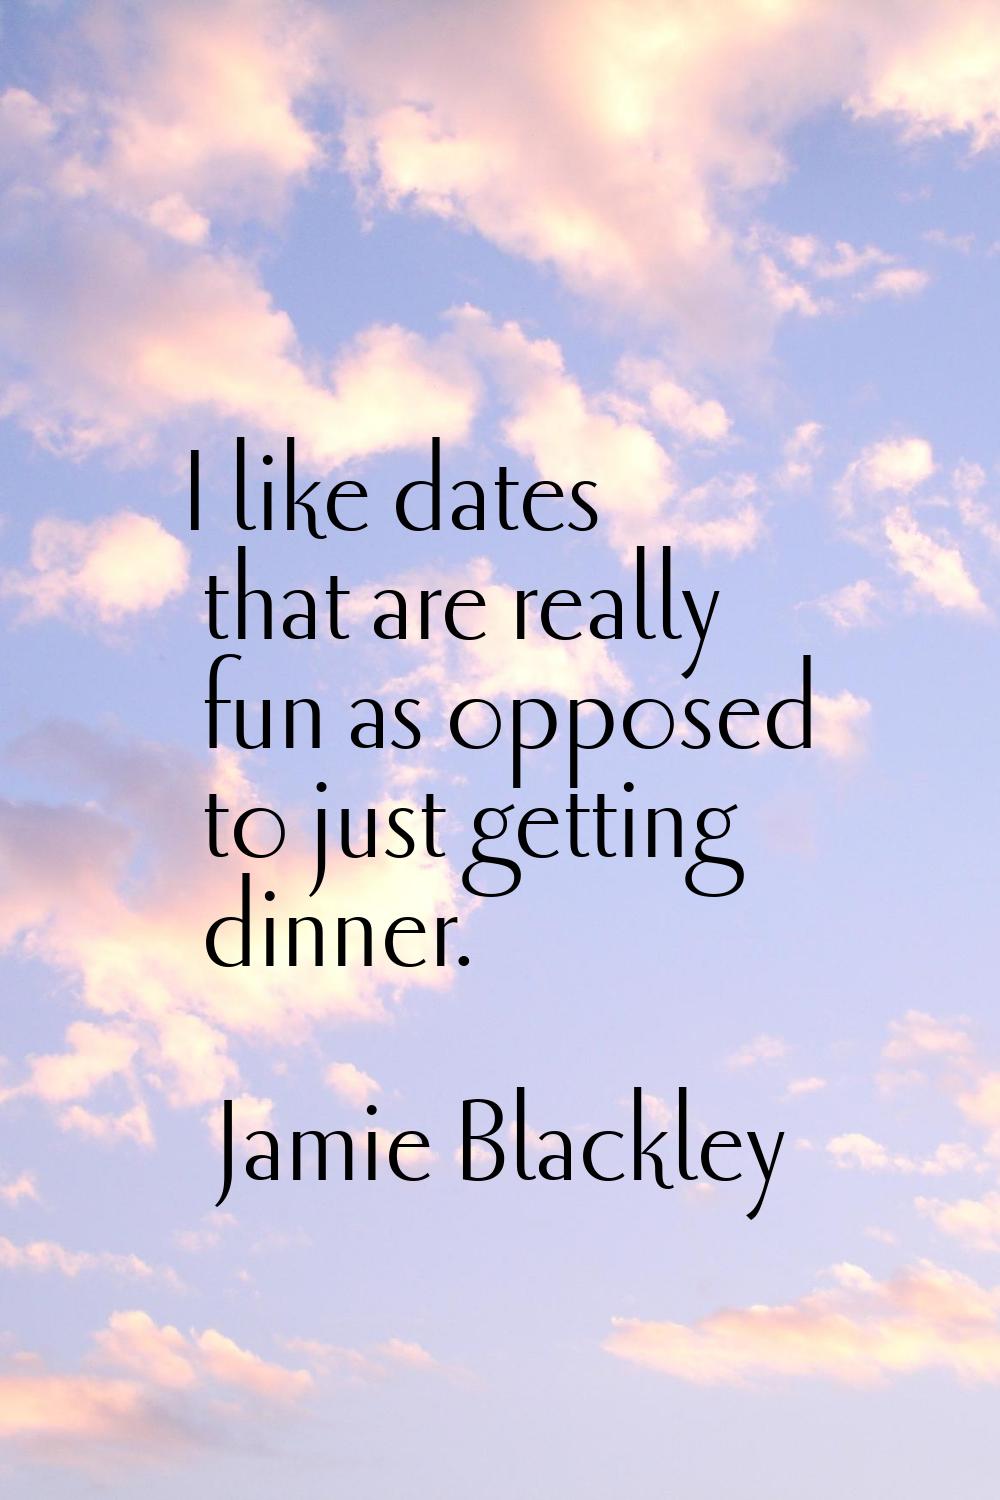 I like dates that are really fun as opposed to just getting dinner.